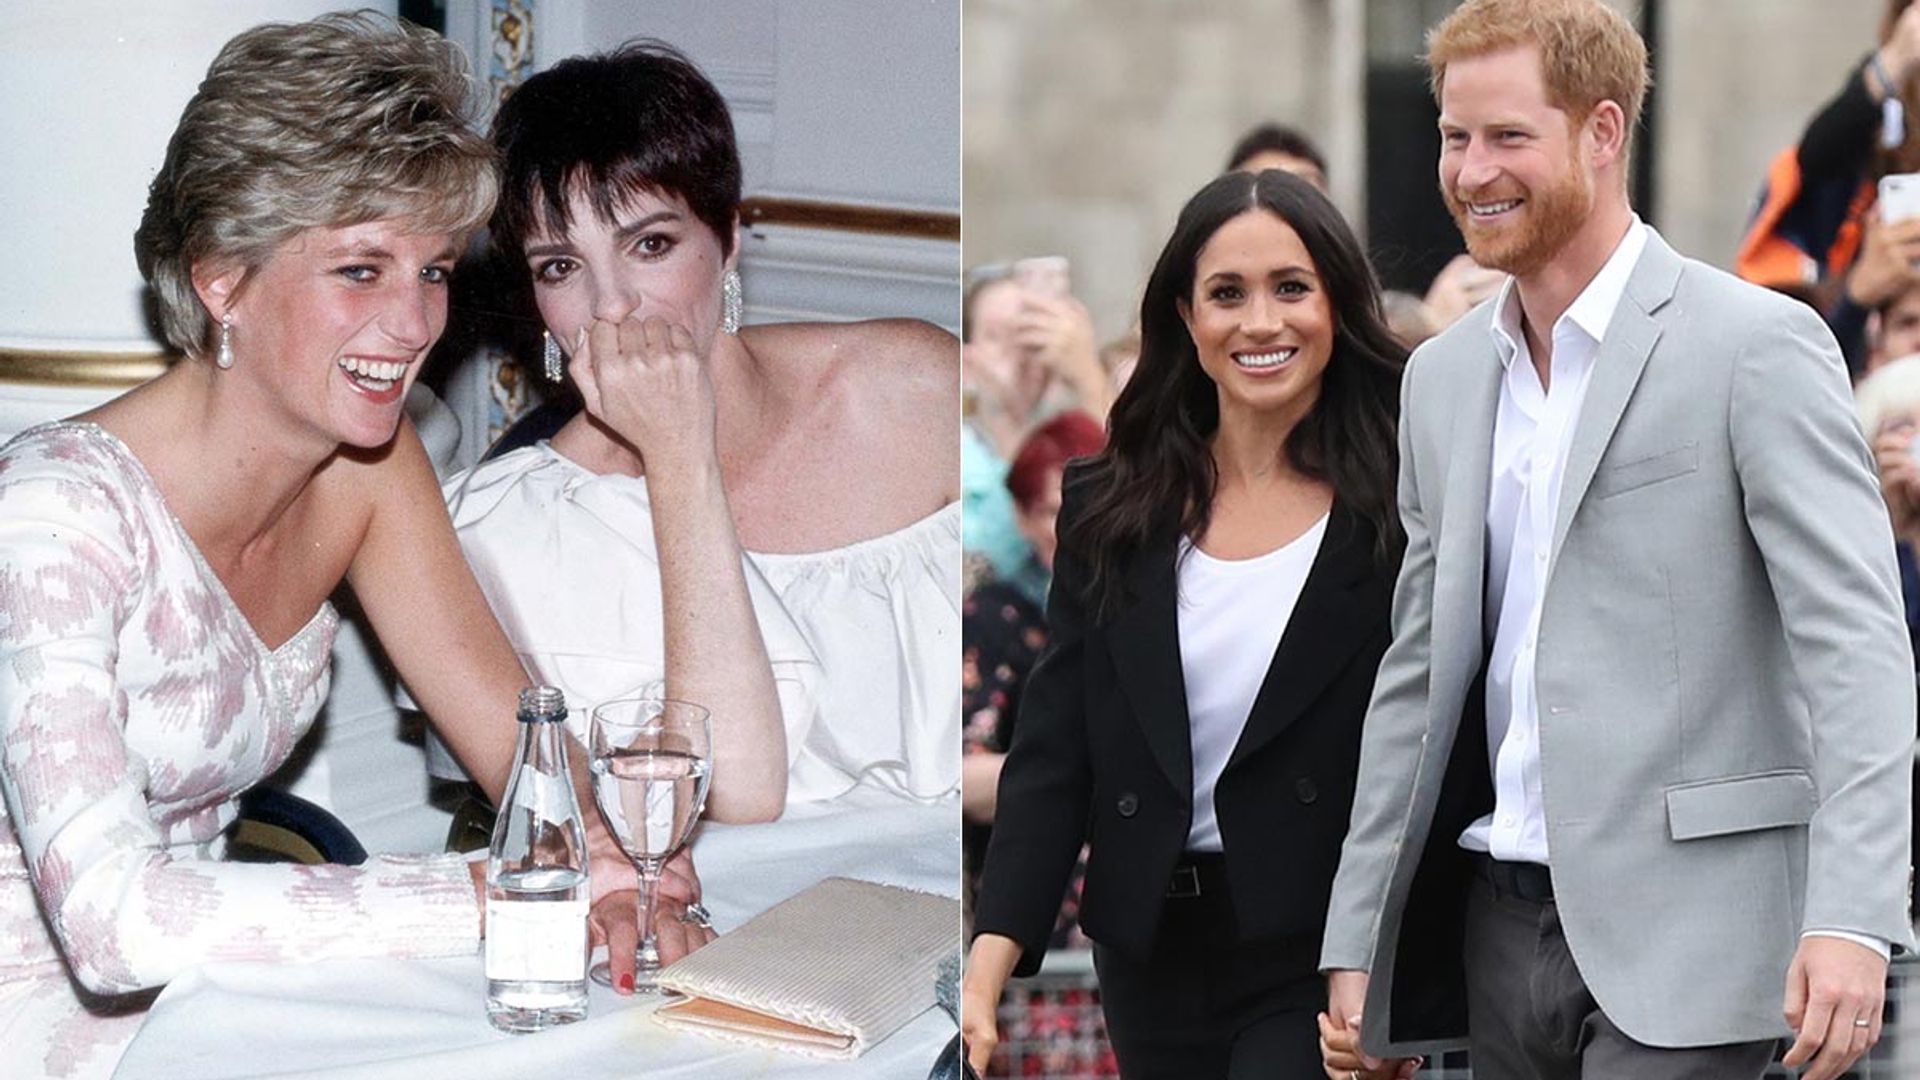 Liza Minnelli denies knowing Prince Harry and Meghan Markle – read her response to friendship reports